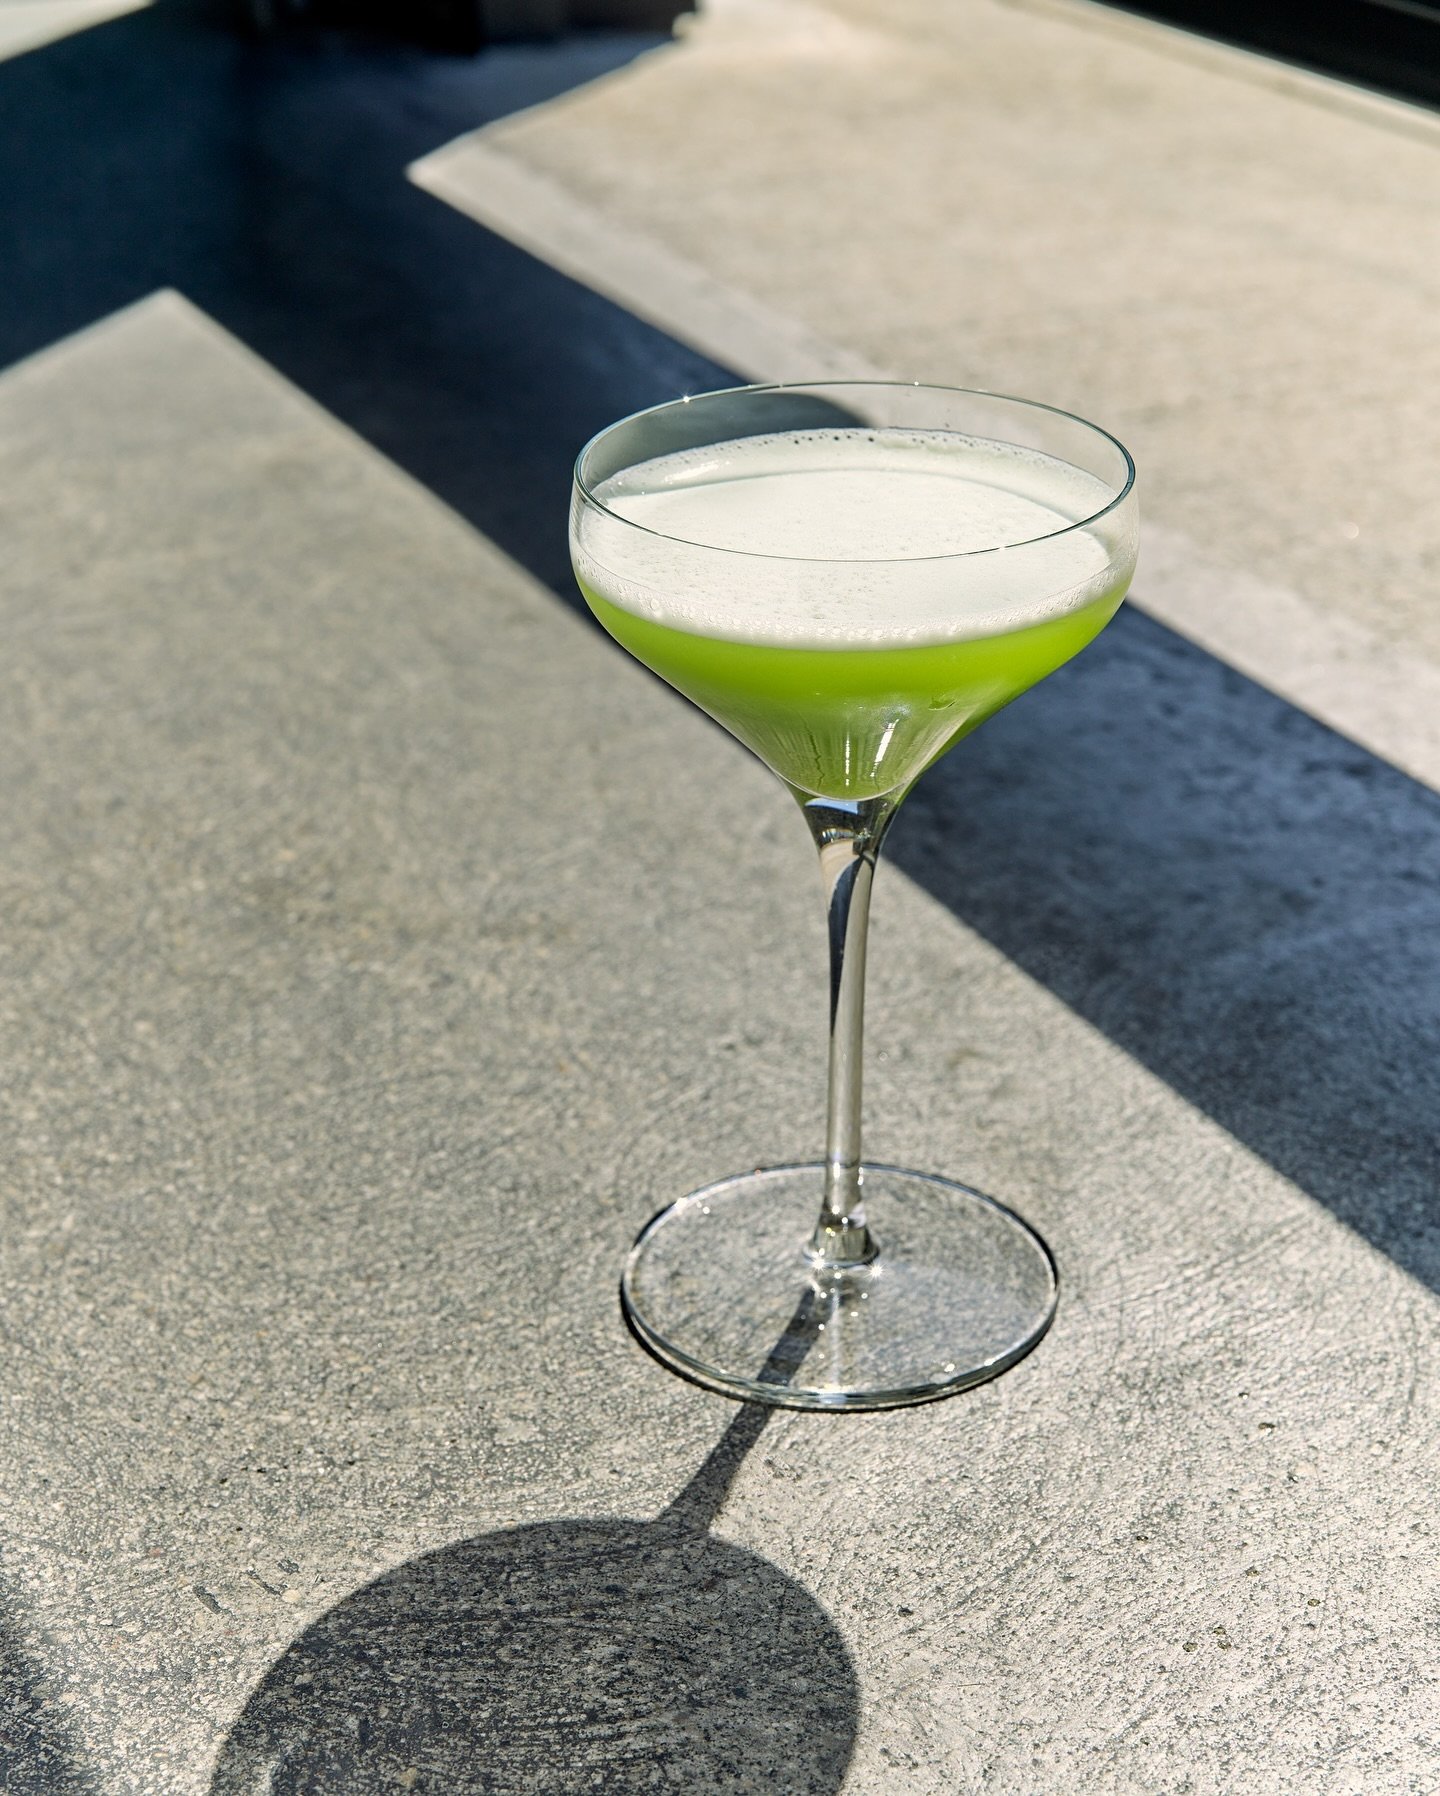 Garage doors are open and we are fully enjoying this weather 🙌 Come kick back with a cocktail &mdash; it&rsquo;s a perfect day for The Green Mile 🌱 

The Green Mile
basil vodka, mesquite smoked gin, sugar snap peas, lime, herbal bitters